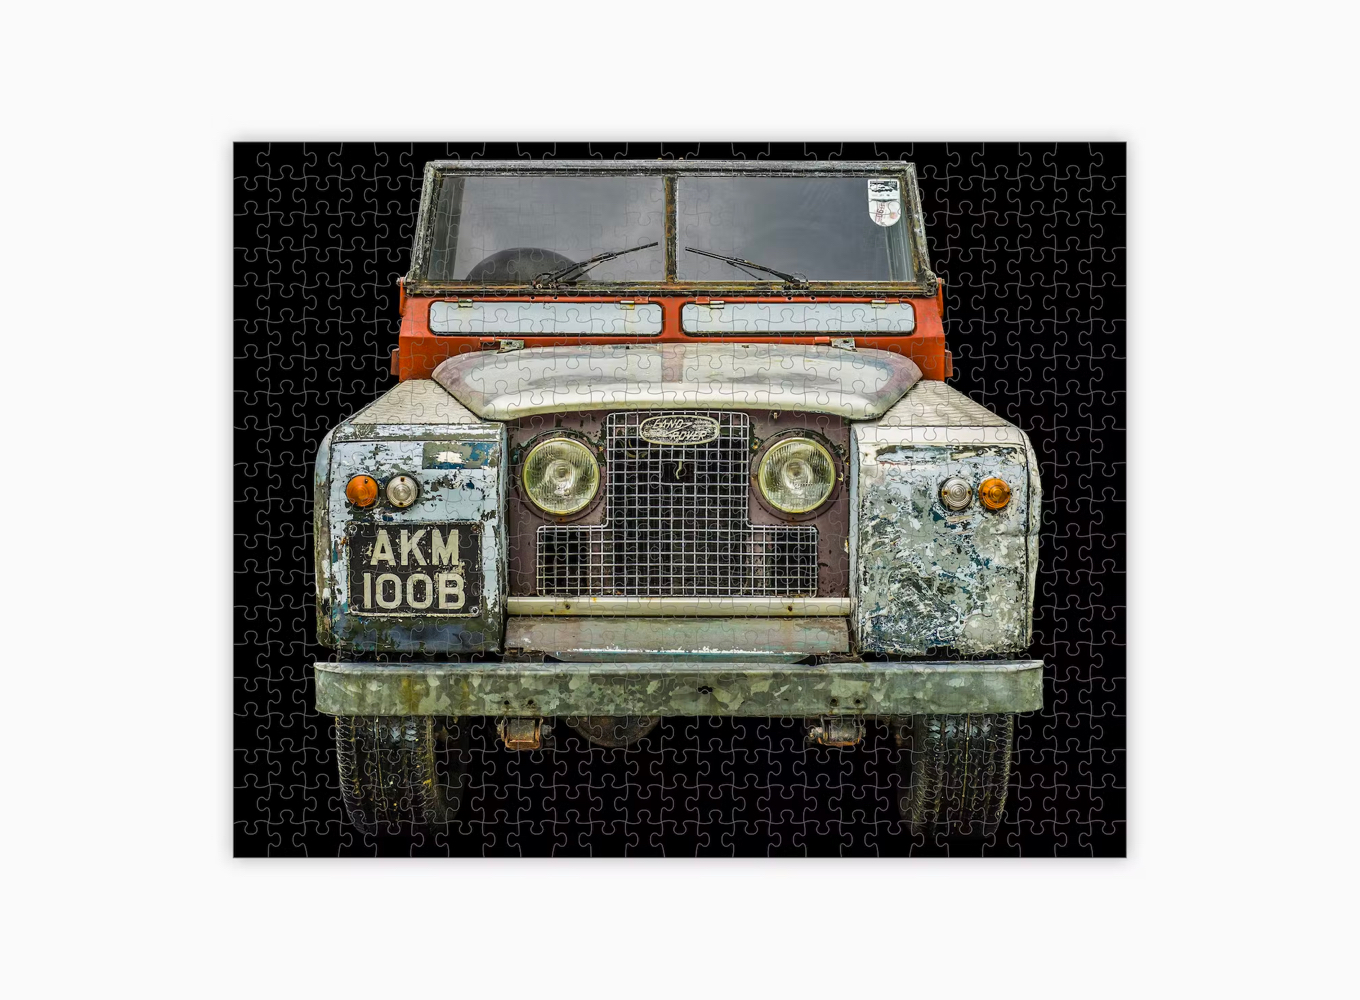 LAND ROVER PUZZLE